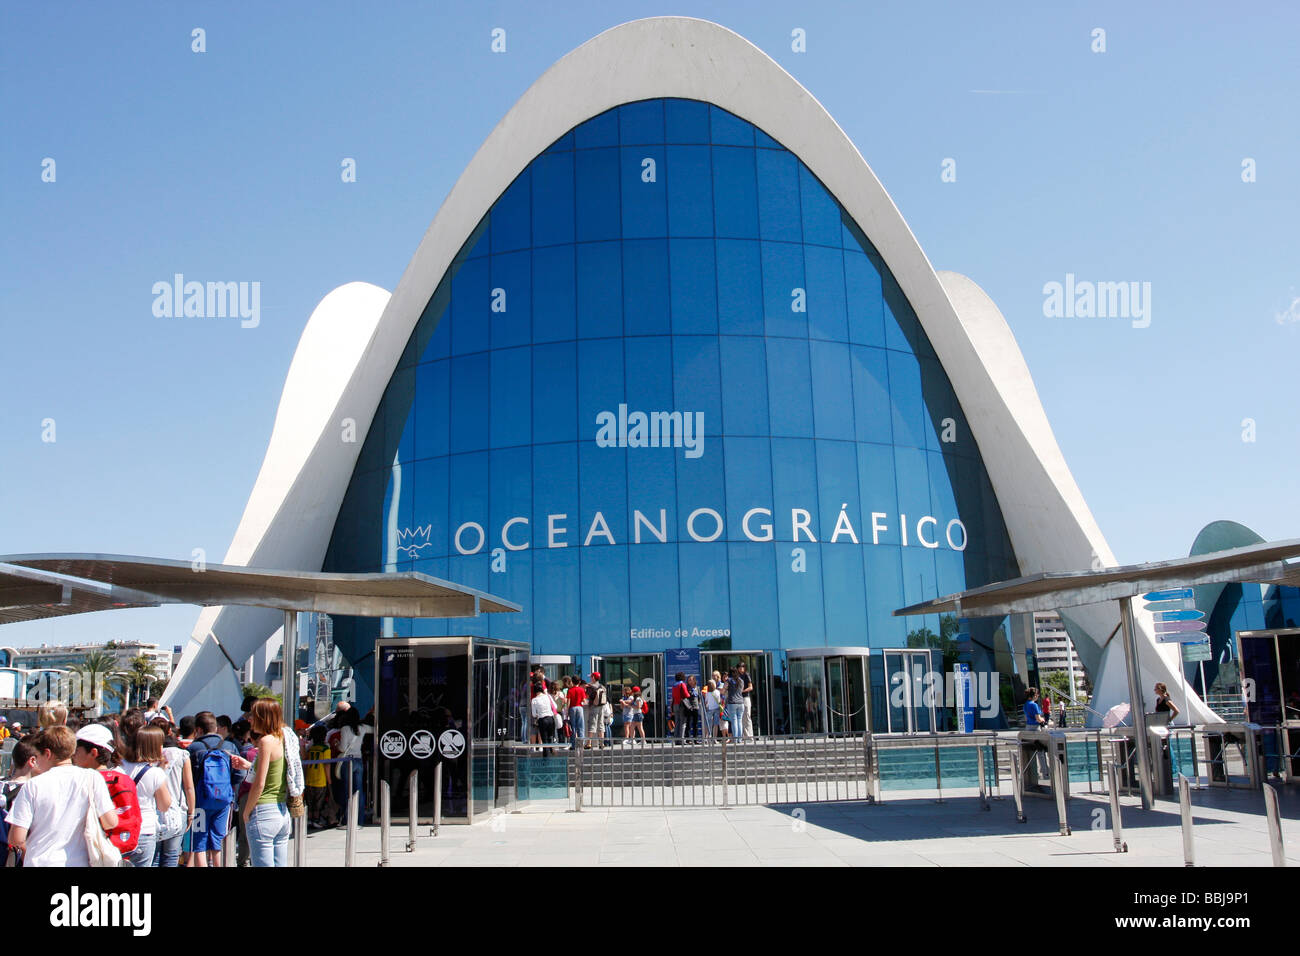 Queues of people waiting to enter the famous Oceanografico in the new City of Arts & Science ,Valencia,Spain, Stock Photo